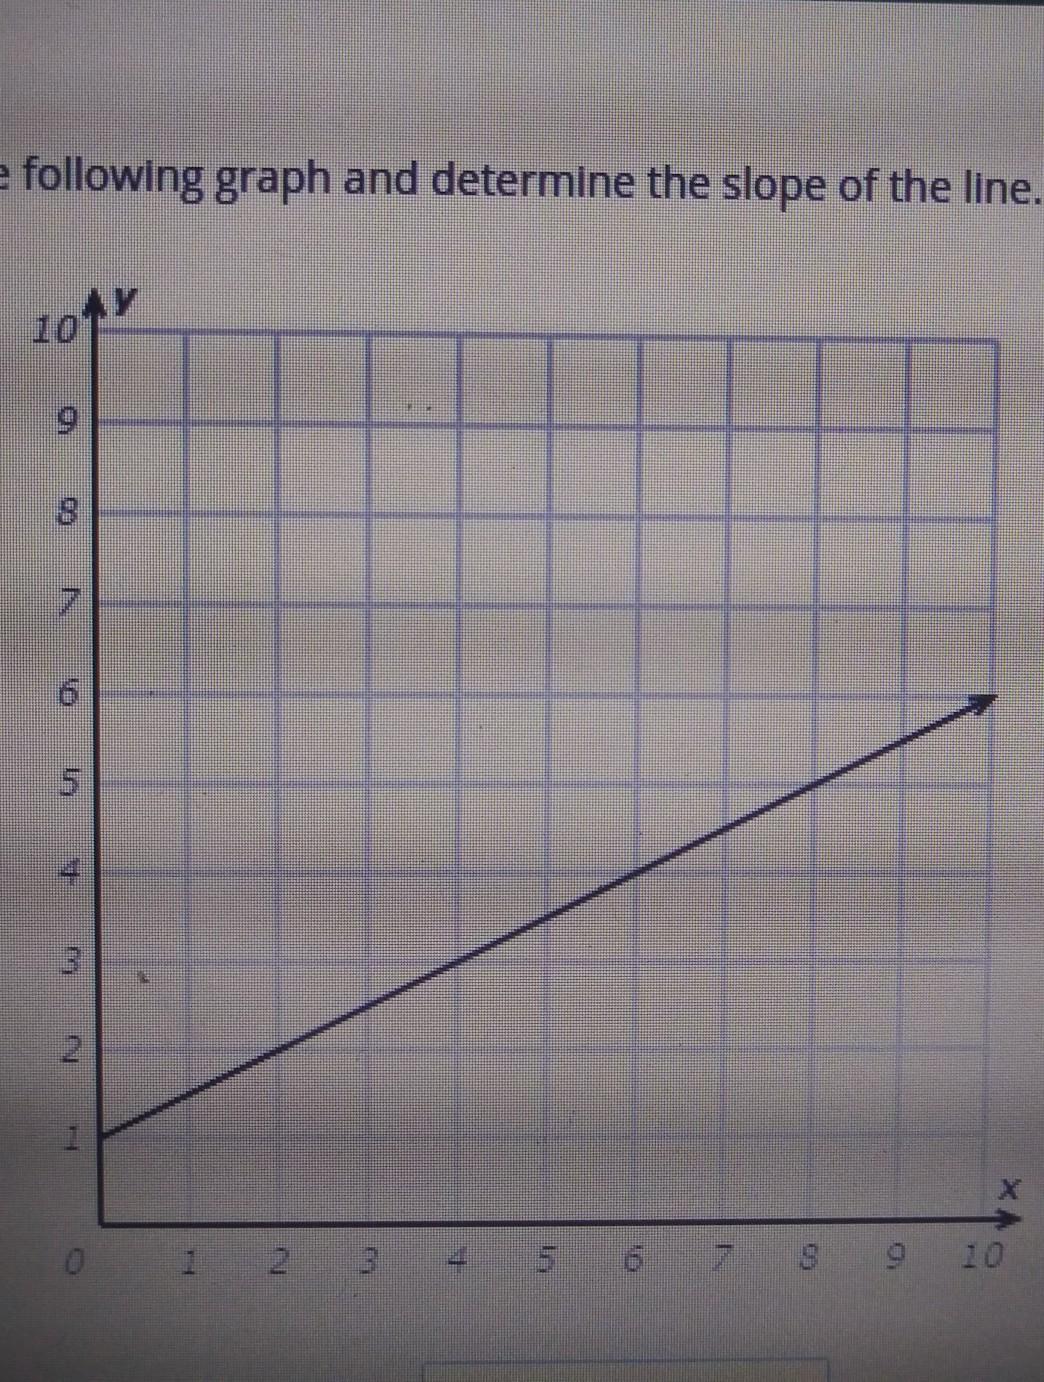 Look At The Following Graph And Determine The Slope Of The Line. AY 10 7 5 3 2 1 1 2 3 4 5 6 7 8 9 8